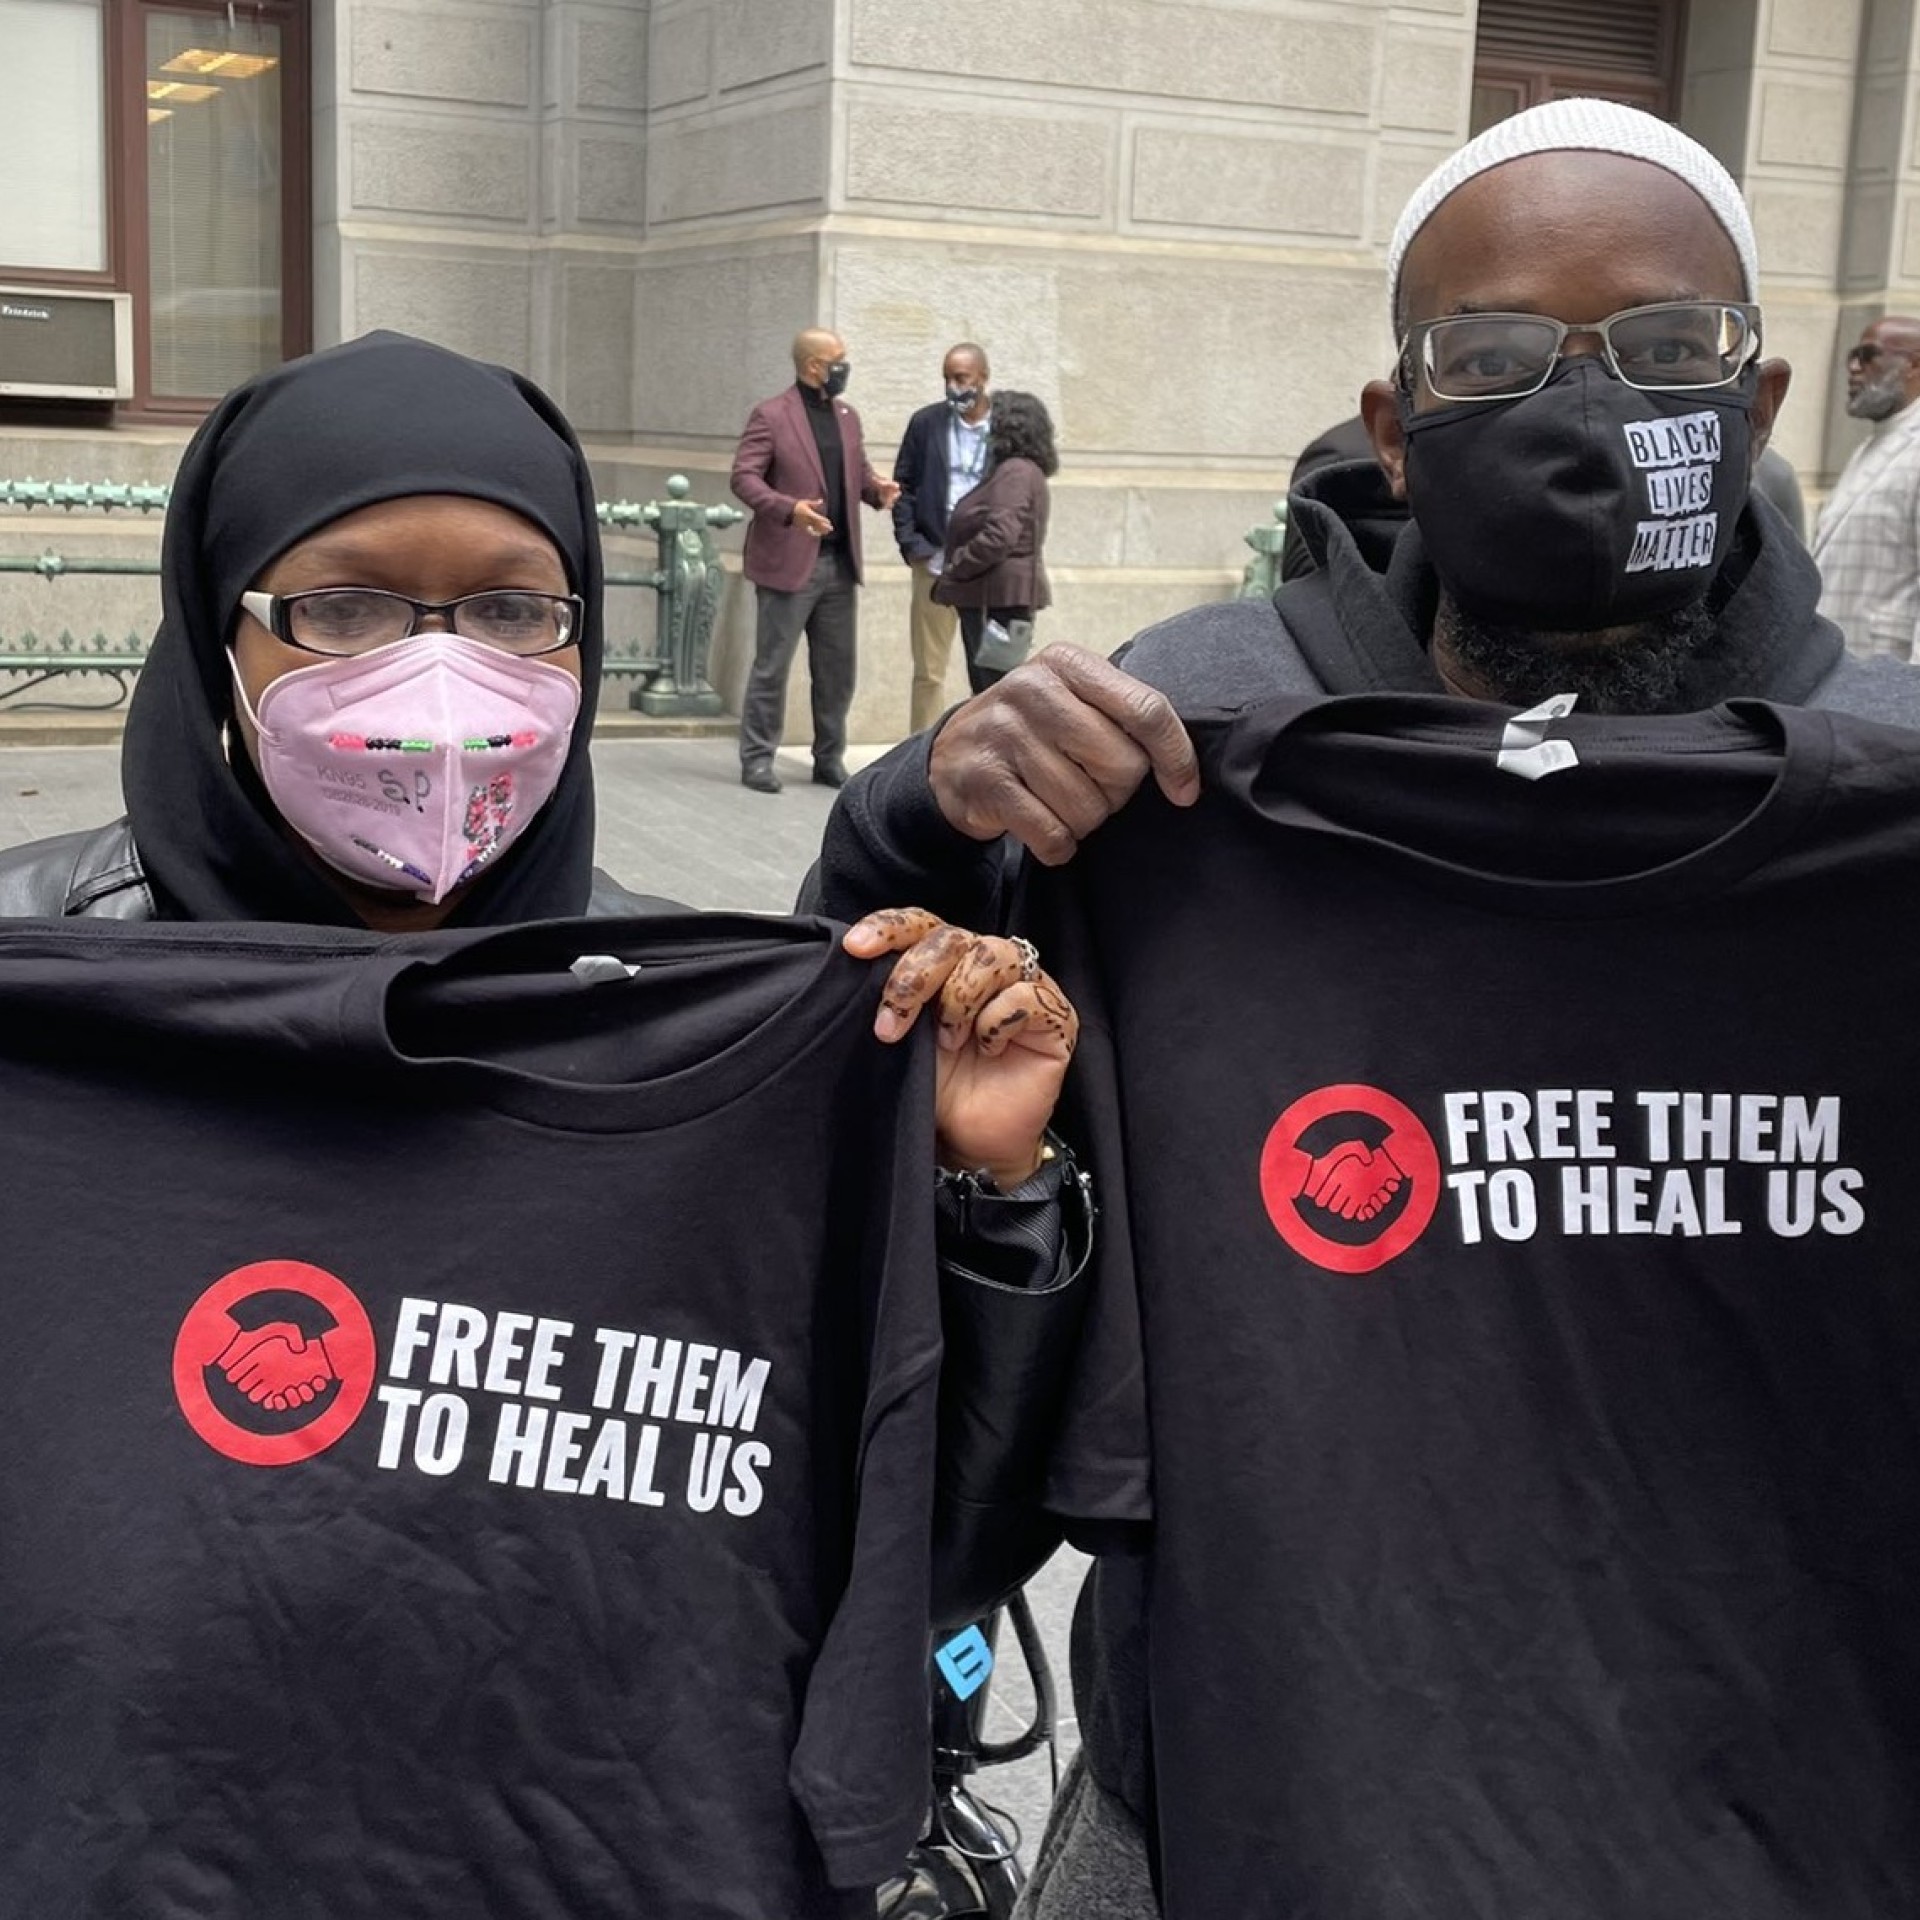 Two members of Free Them to Heal Us hold t-shirts with the Free Them to Heal Us logo displayed